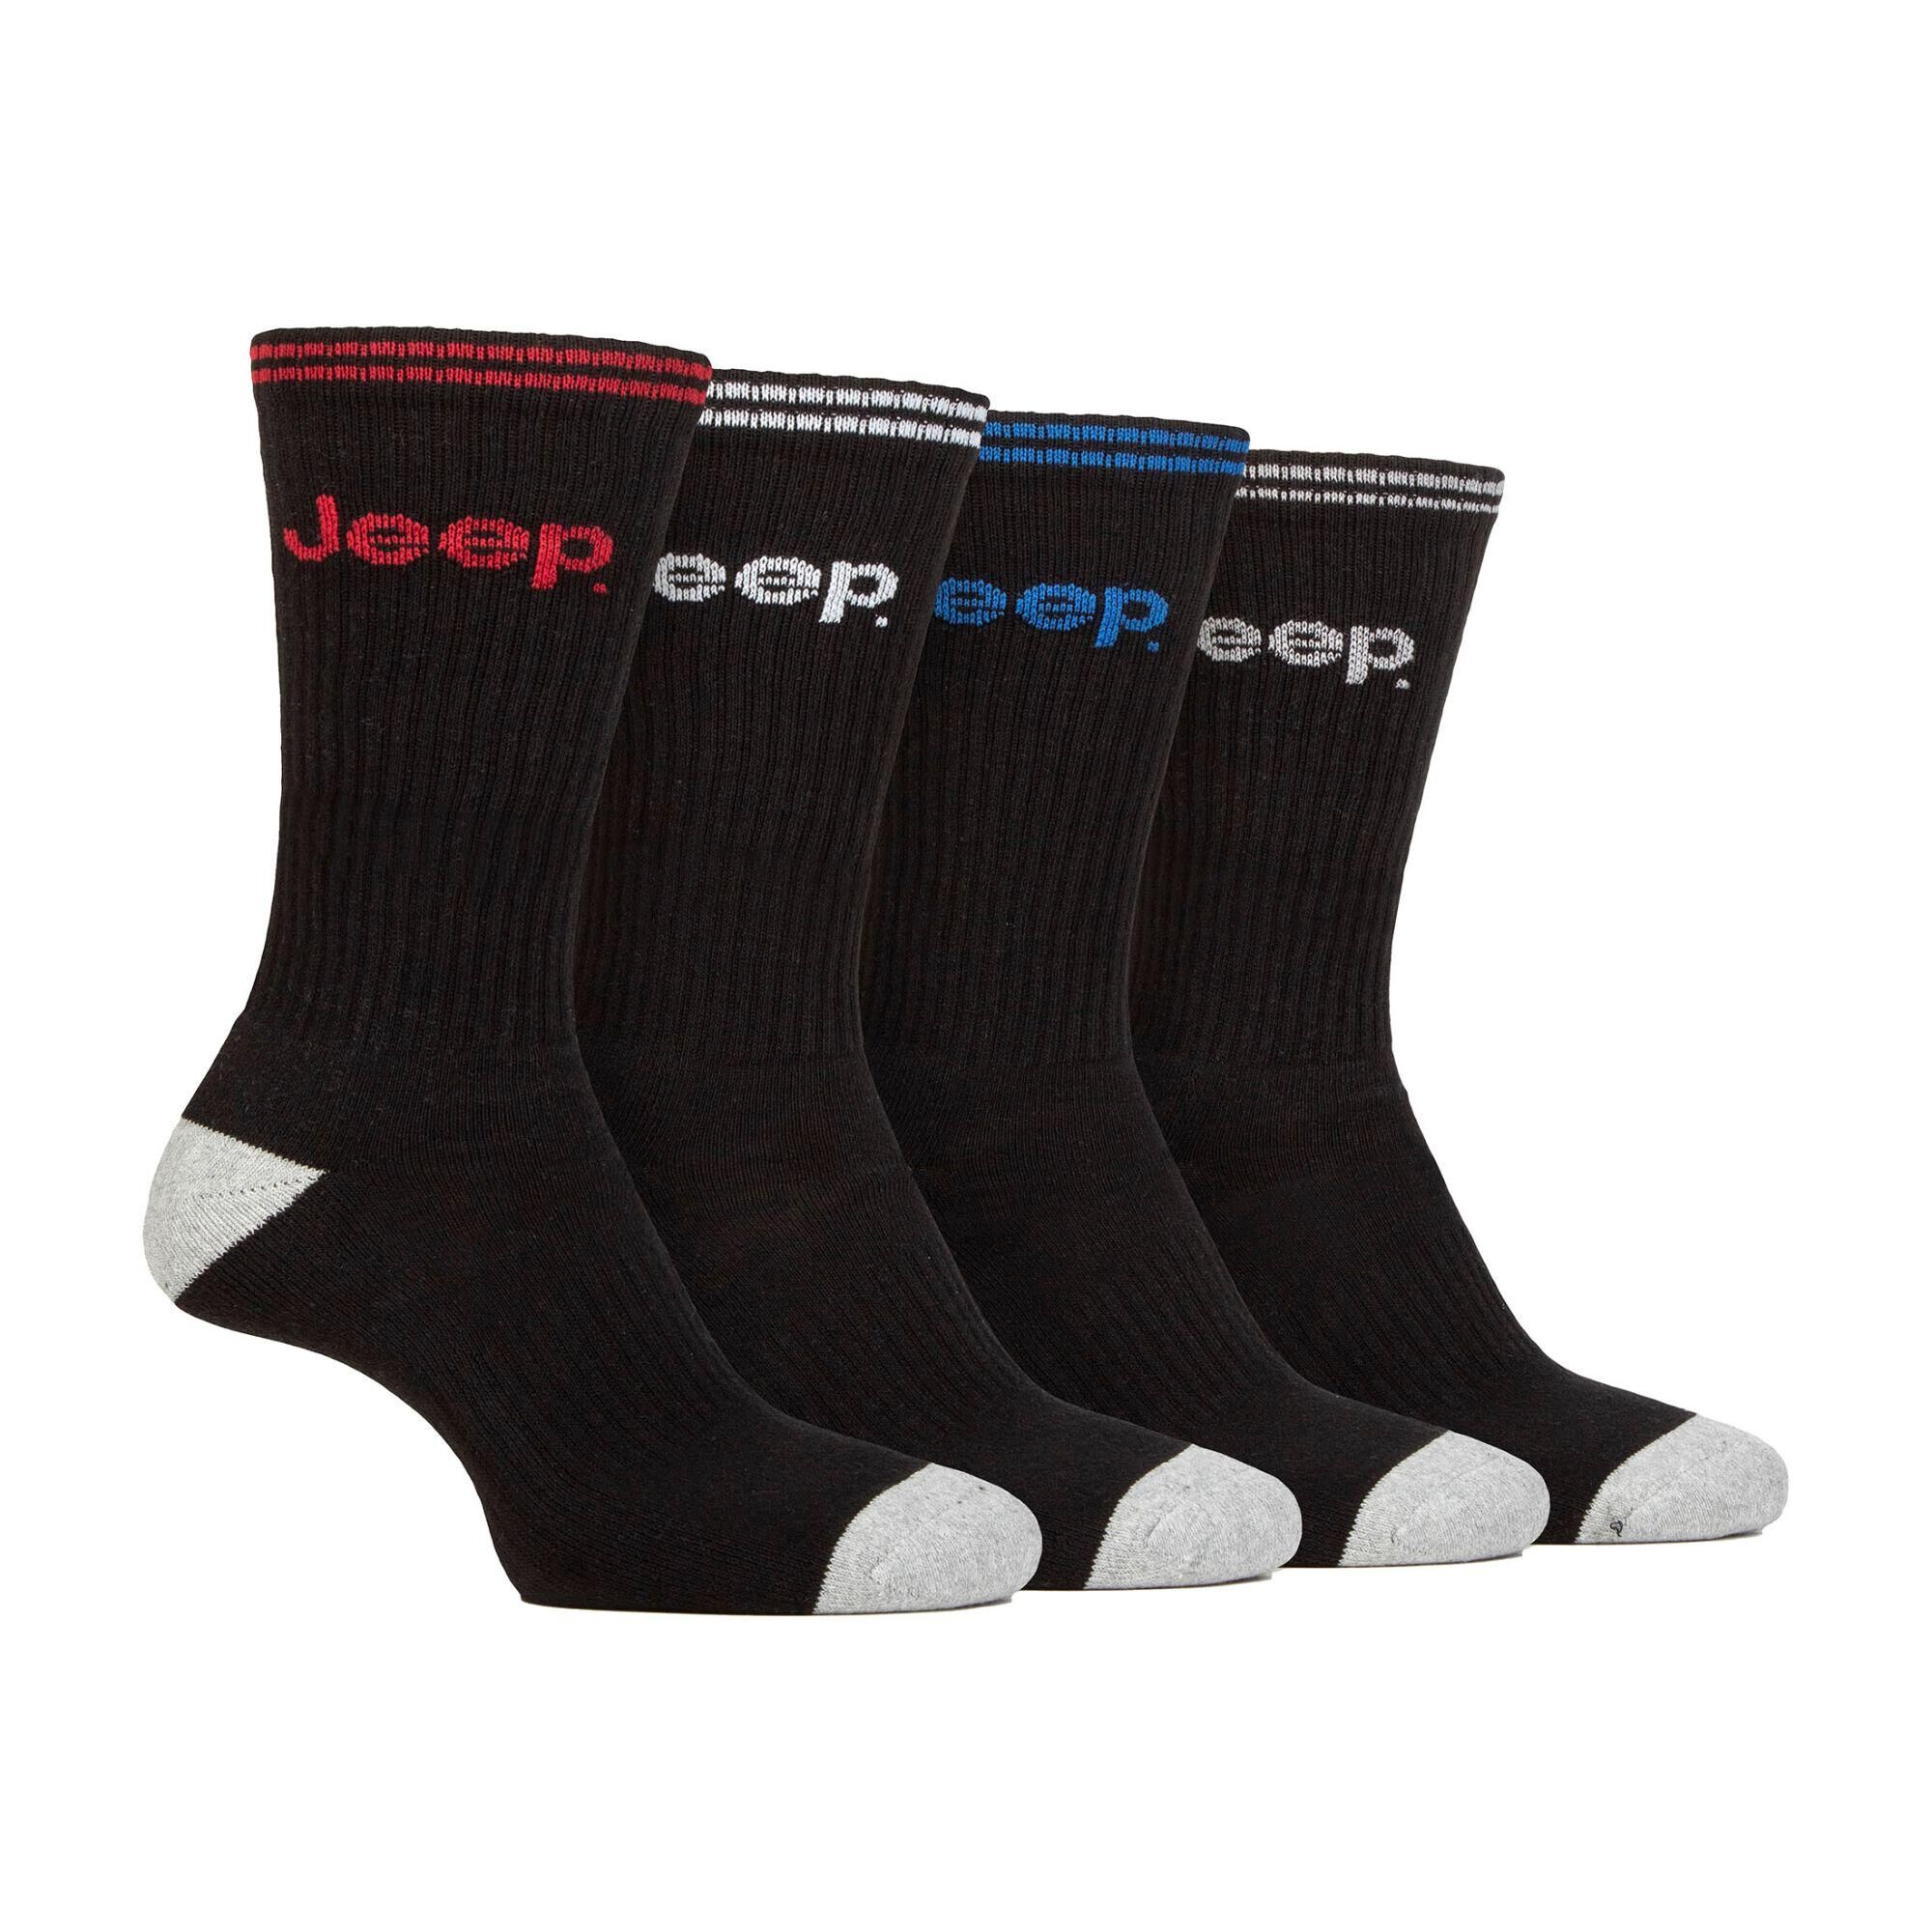 JEEP 4 Pairs Mens Sport Crew Running Breathable Cotton Socks